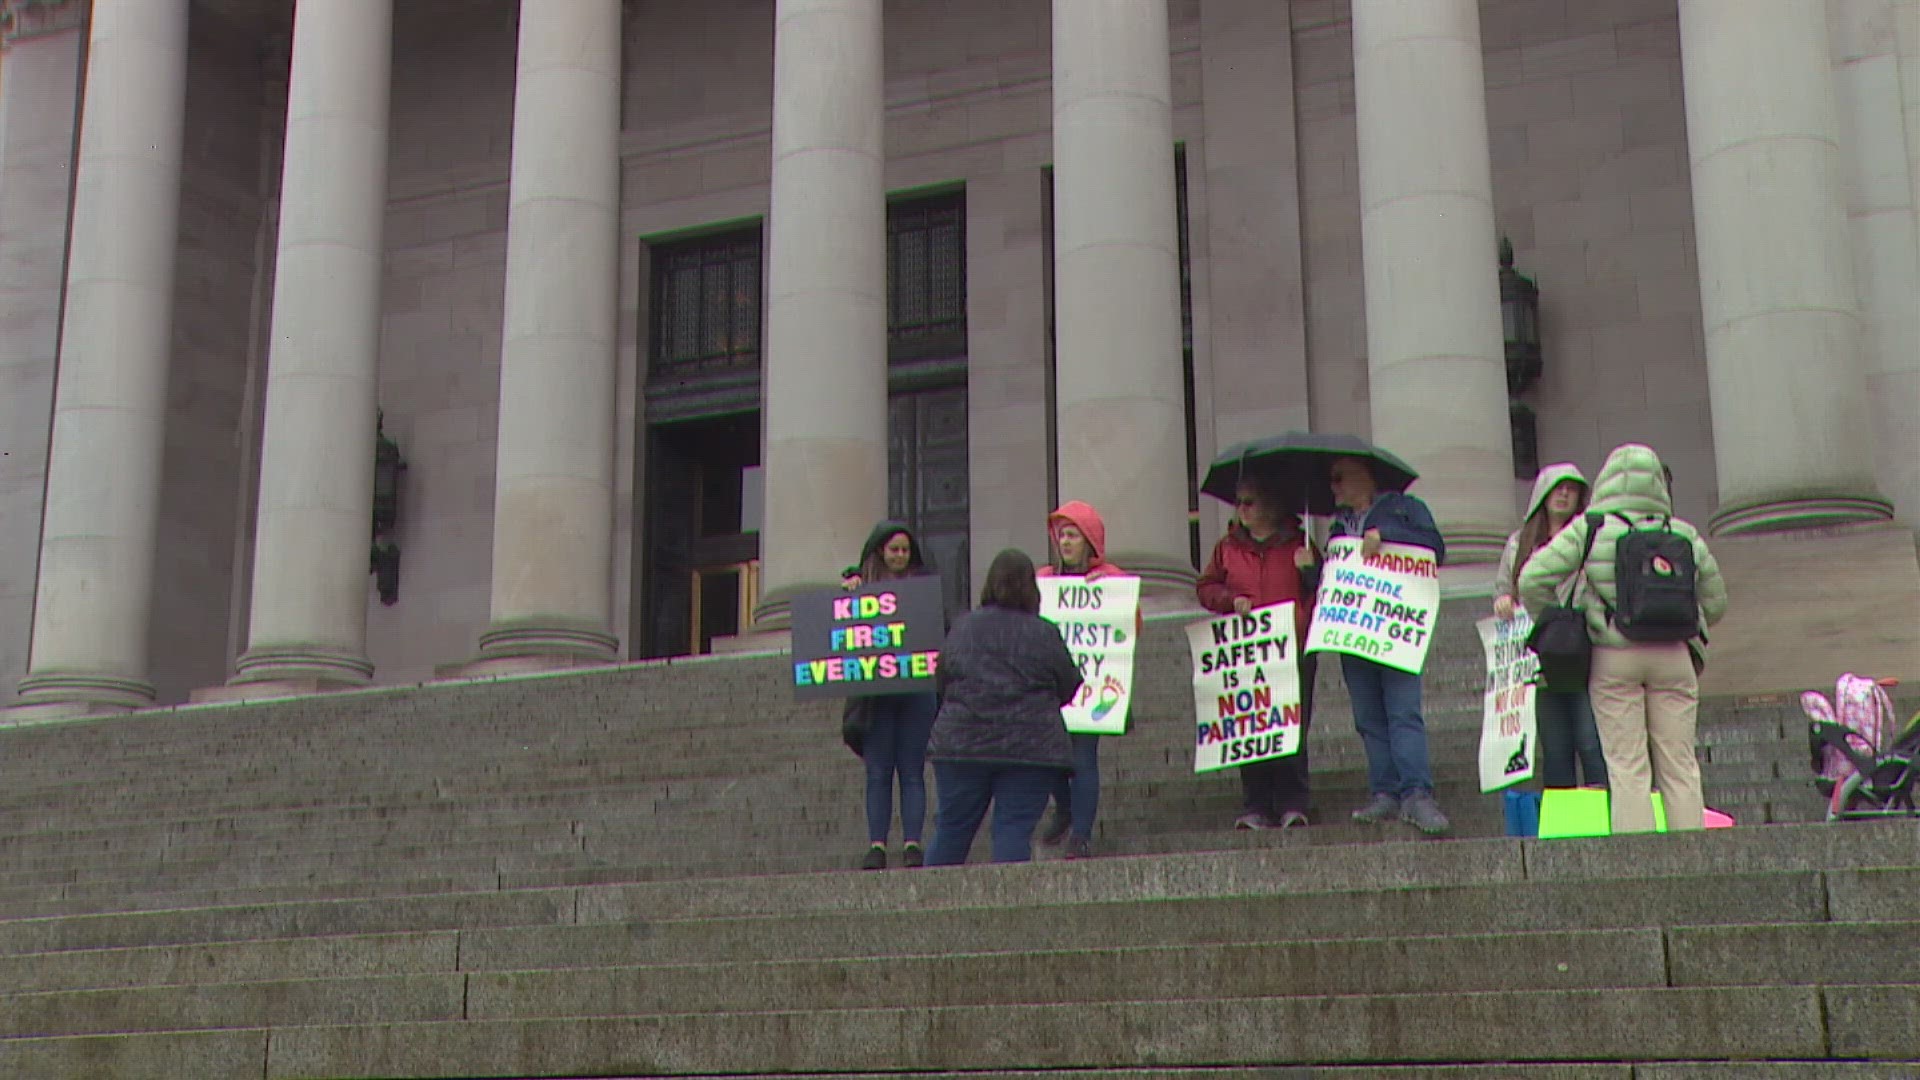 A group of foster parents went to Olympia on Tuesday, calling on legislators to change state laws that they believe are harmful to children.